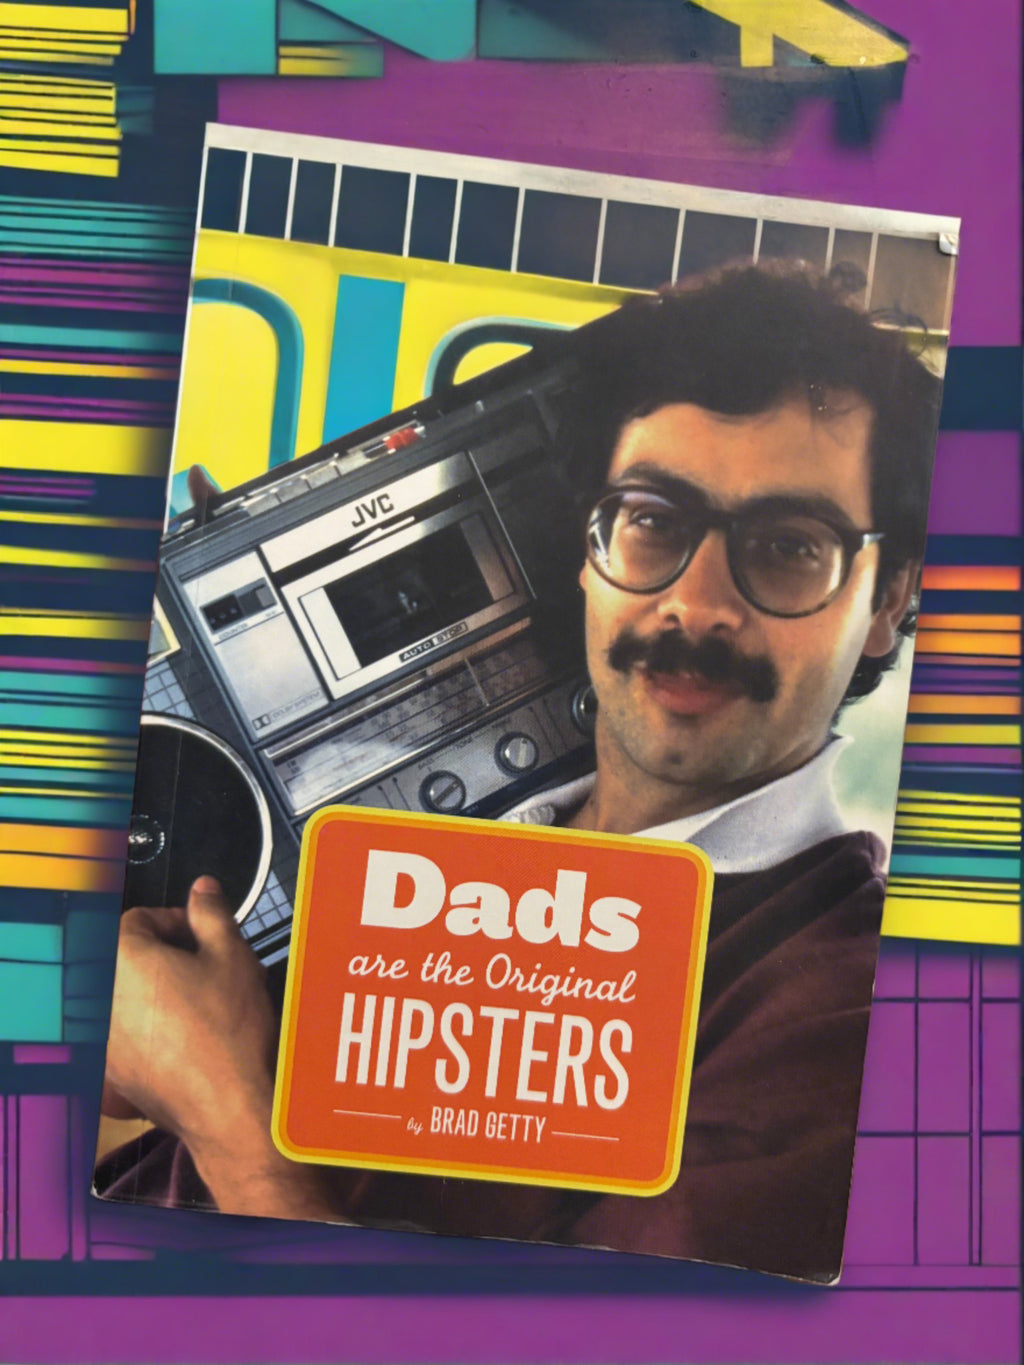 Dads are the Original Hipsters- By Brad Getty